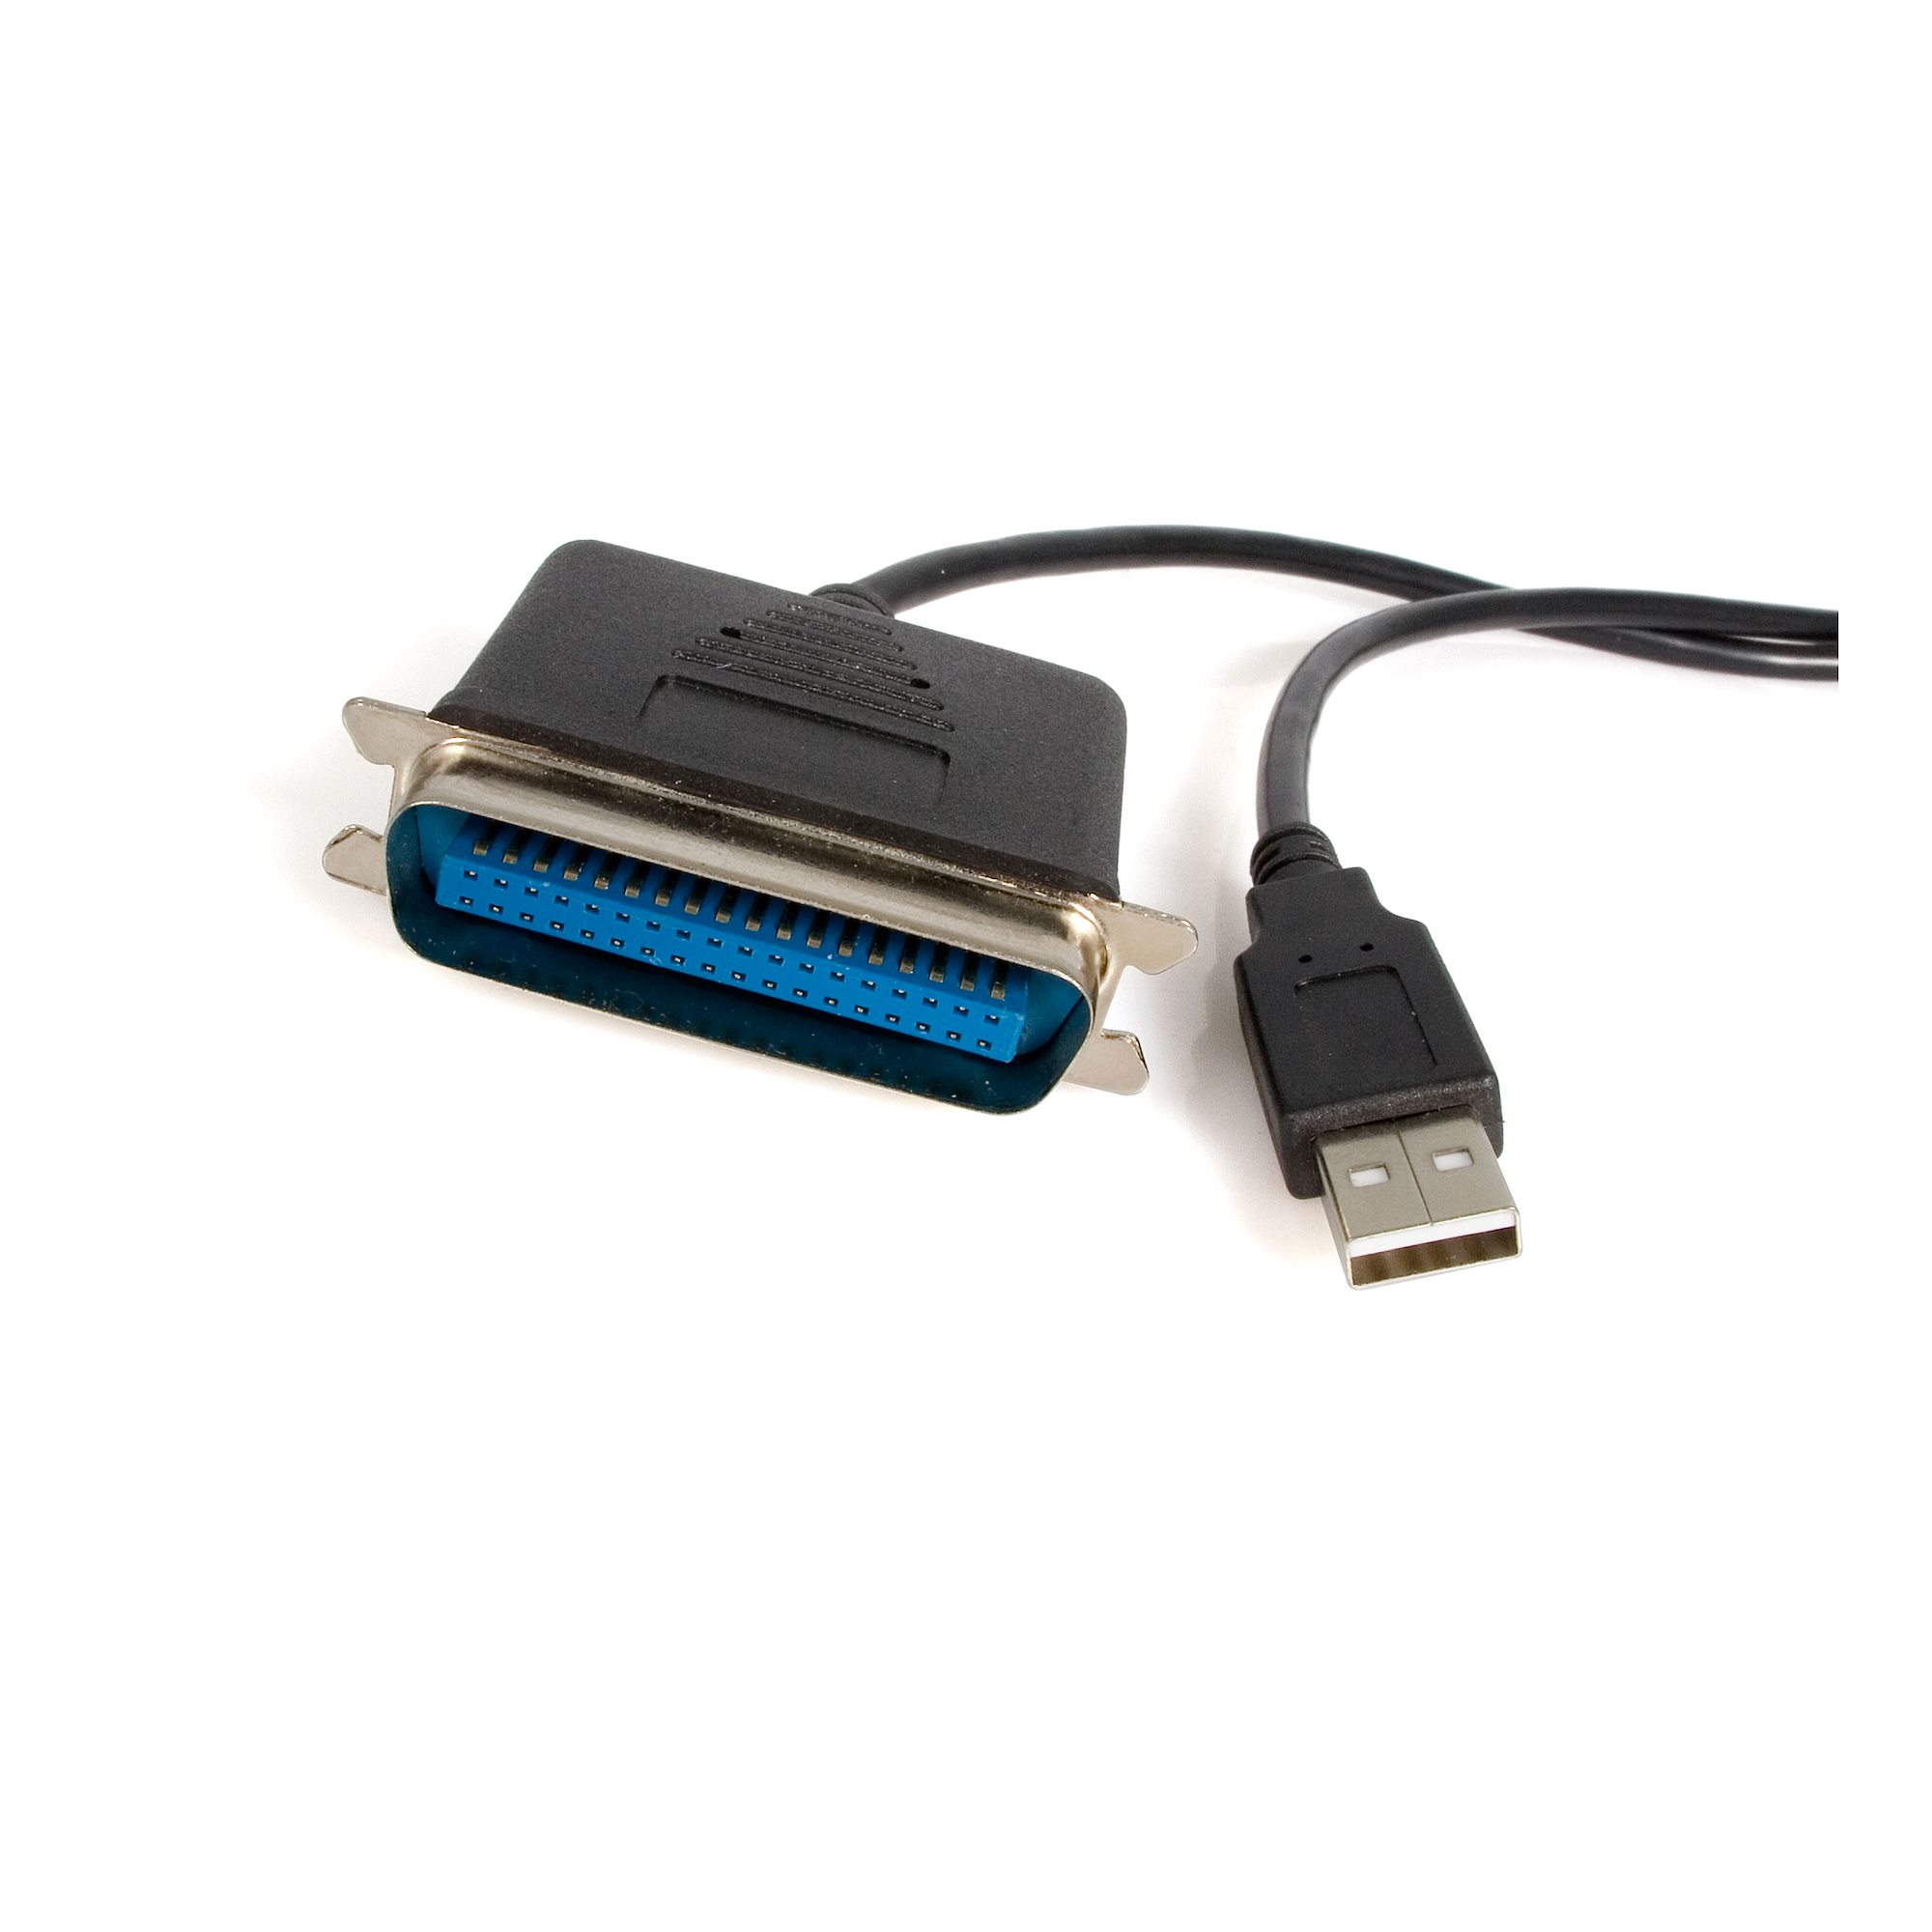 【ICUSB1284】6 FT USB TO PARALLEL PRINTER ADA